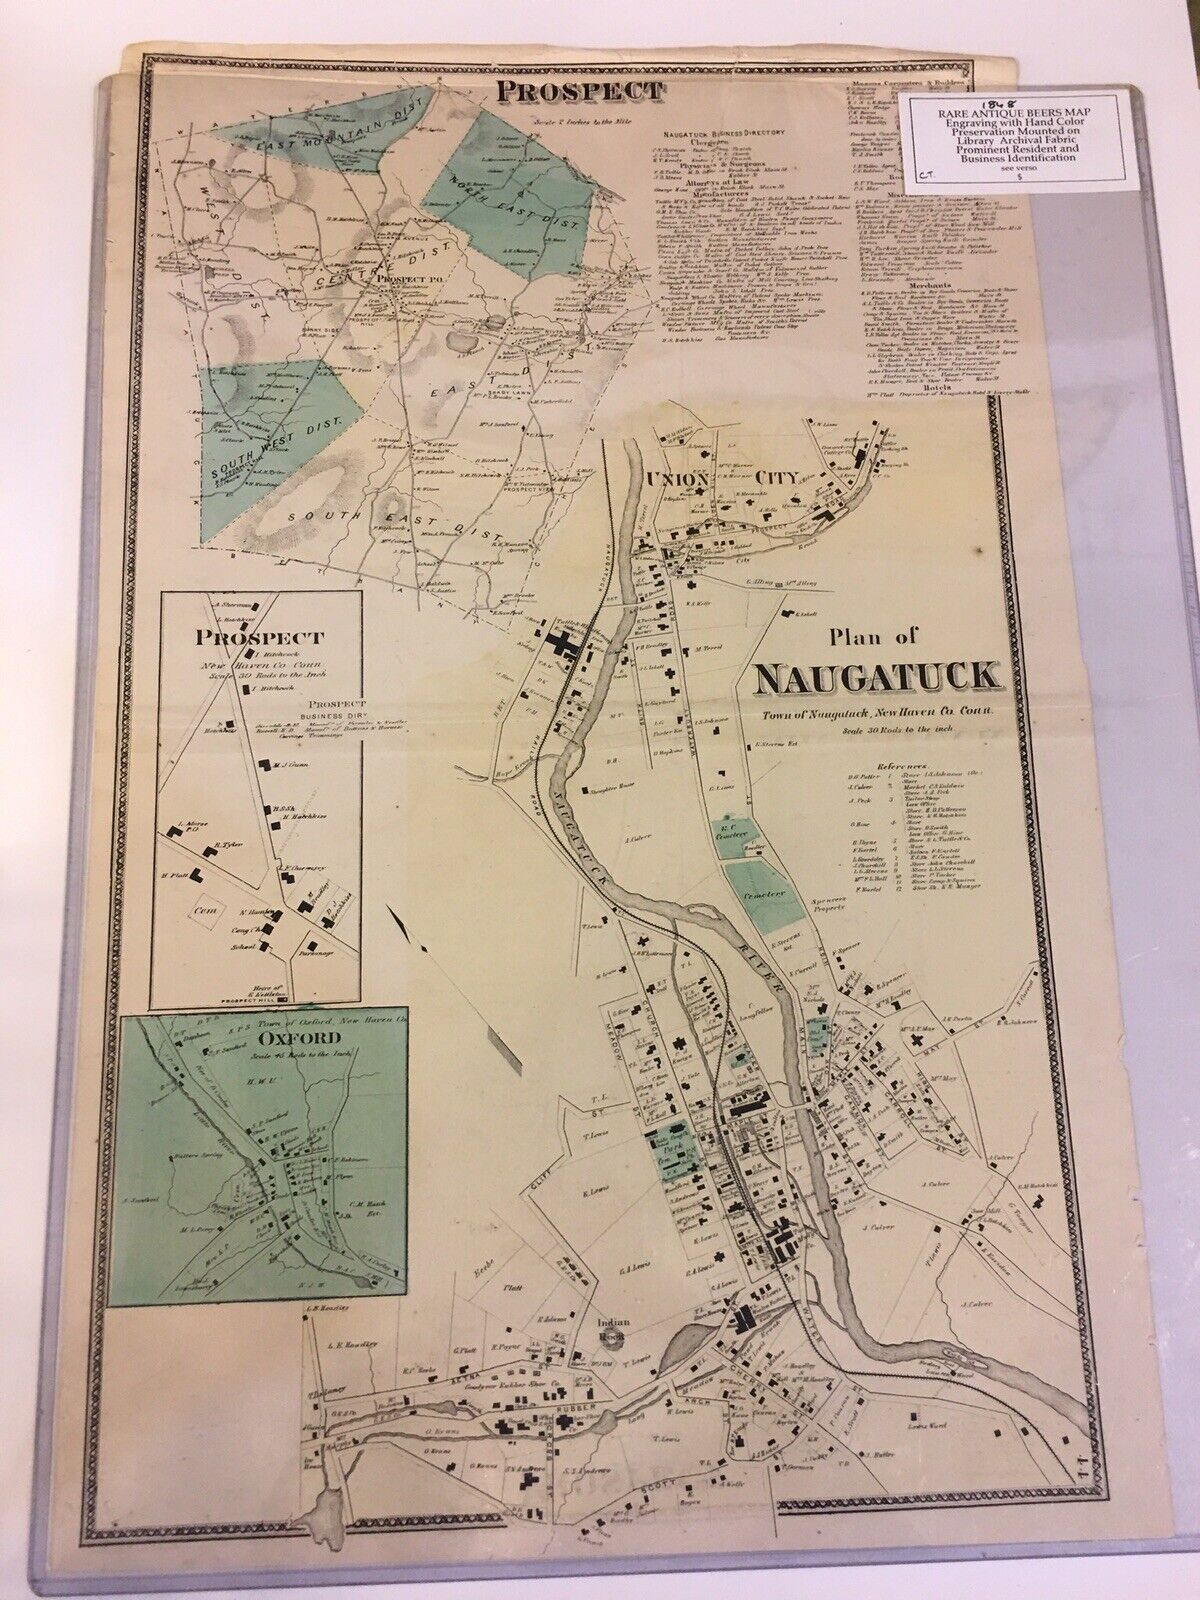 PROSPECT & PLAN OF NAUGATUCK, CT., 1868 HAND COLORED MAP, NOT A COPY